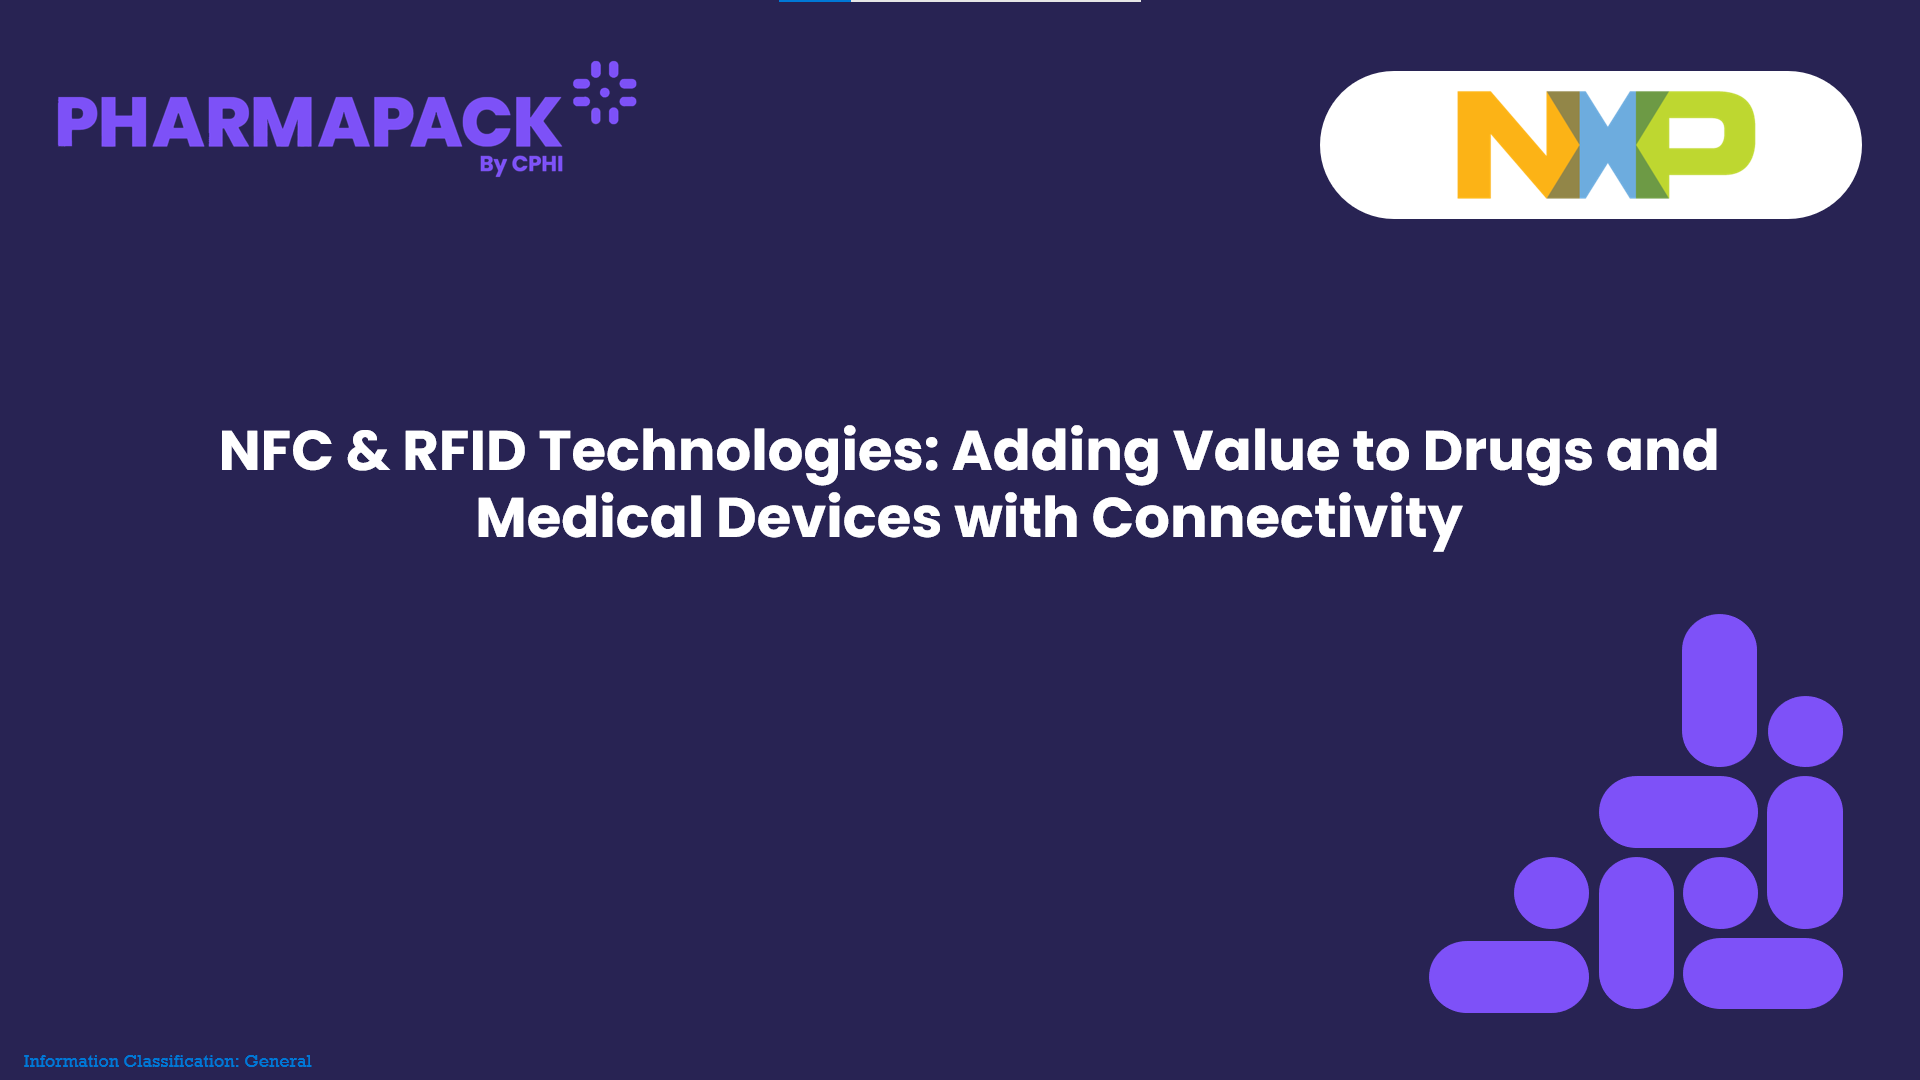 NFC & RFID Technologies: Adding Value to Drugs and Medical Devices with Connectivity